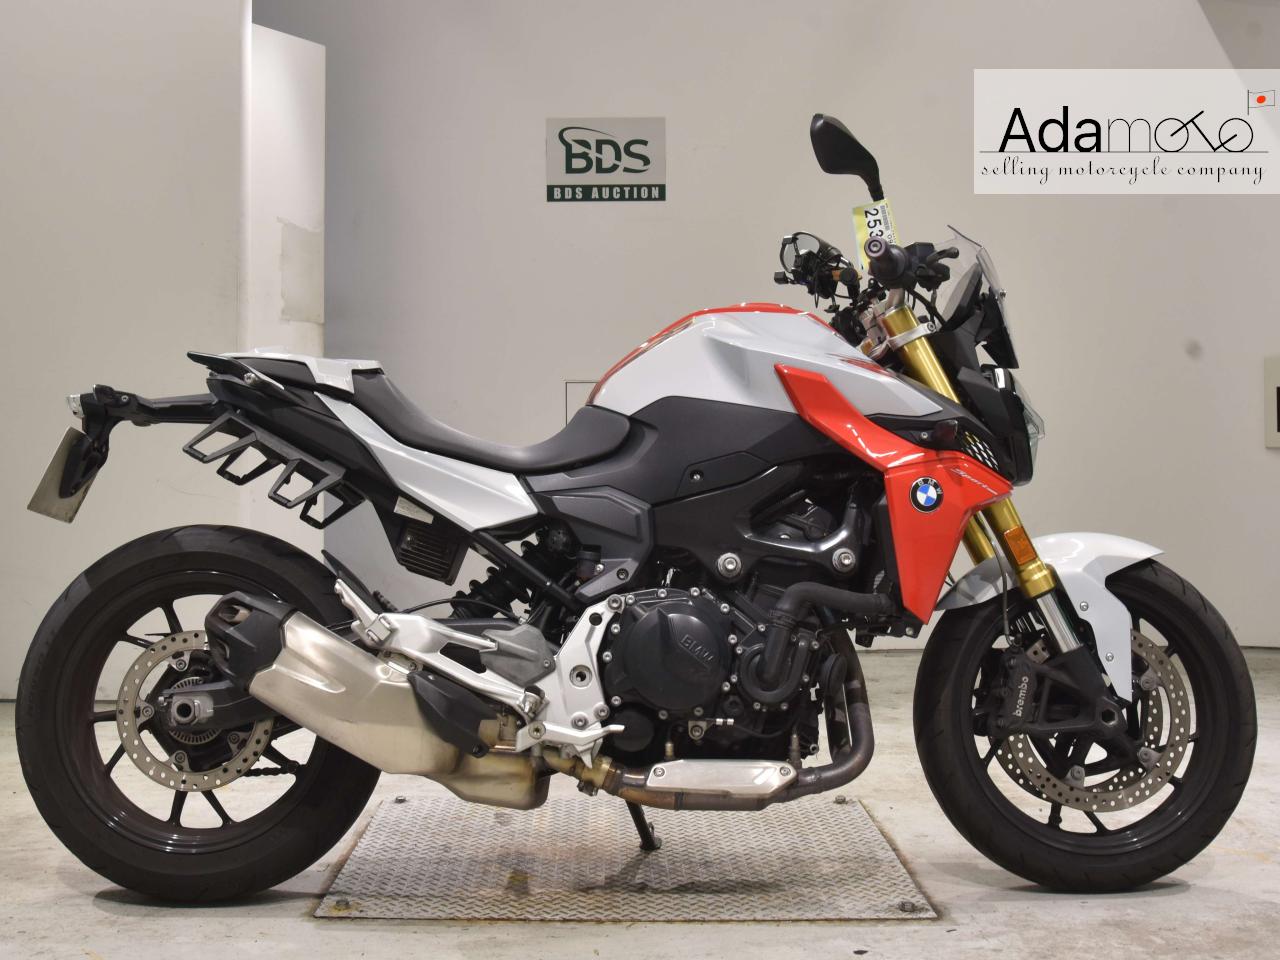 BMW F900R - Adamoto - Motorcycles from Japan